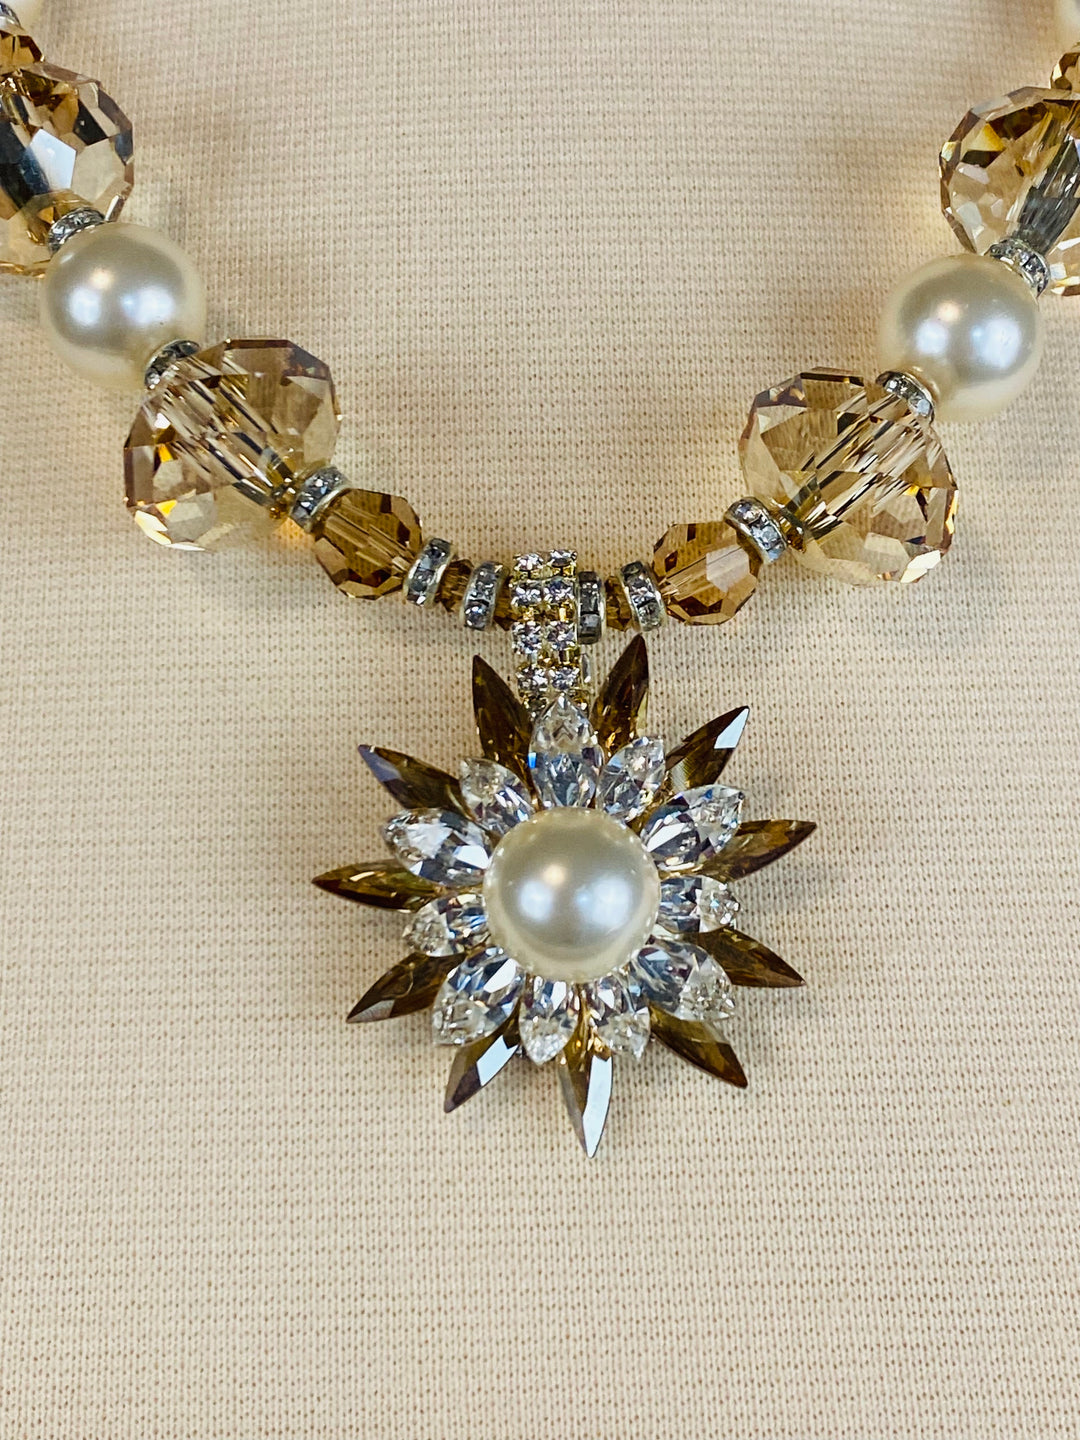 Crystal and Pearl Star Necklace by Erin Cole